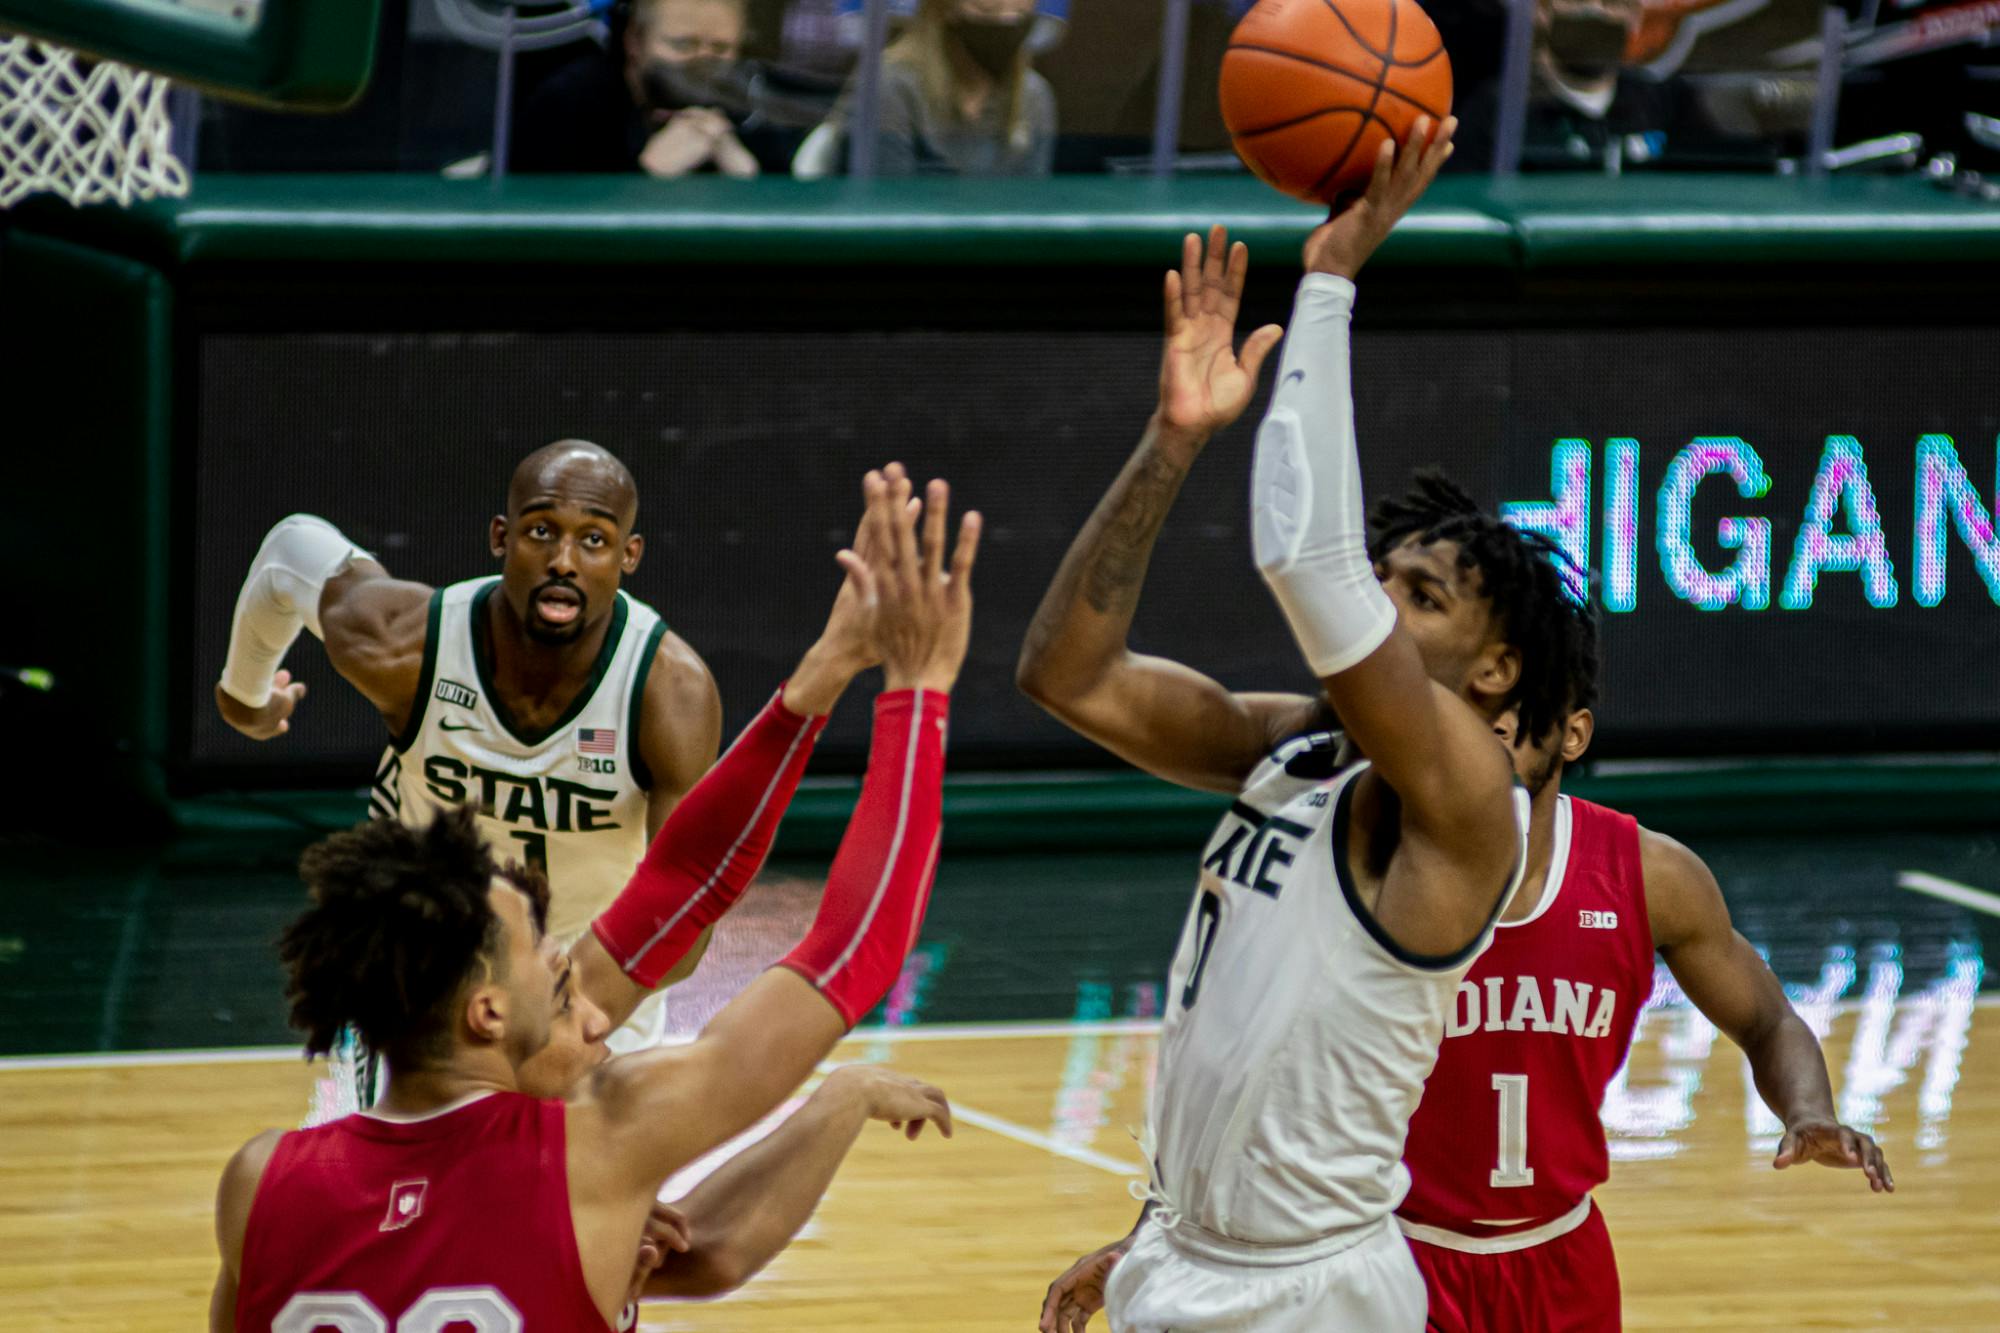 Junior guard Aaron Henry shoots a floater on Mar. 2, 2021. Henry had an all-around performance with 22 points, eight rebound and five assists in the Spartan victory against the Hoosiers.